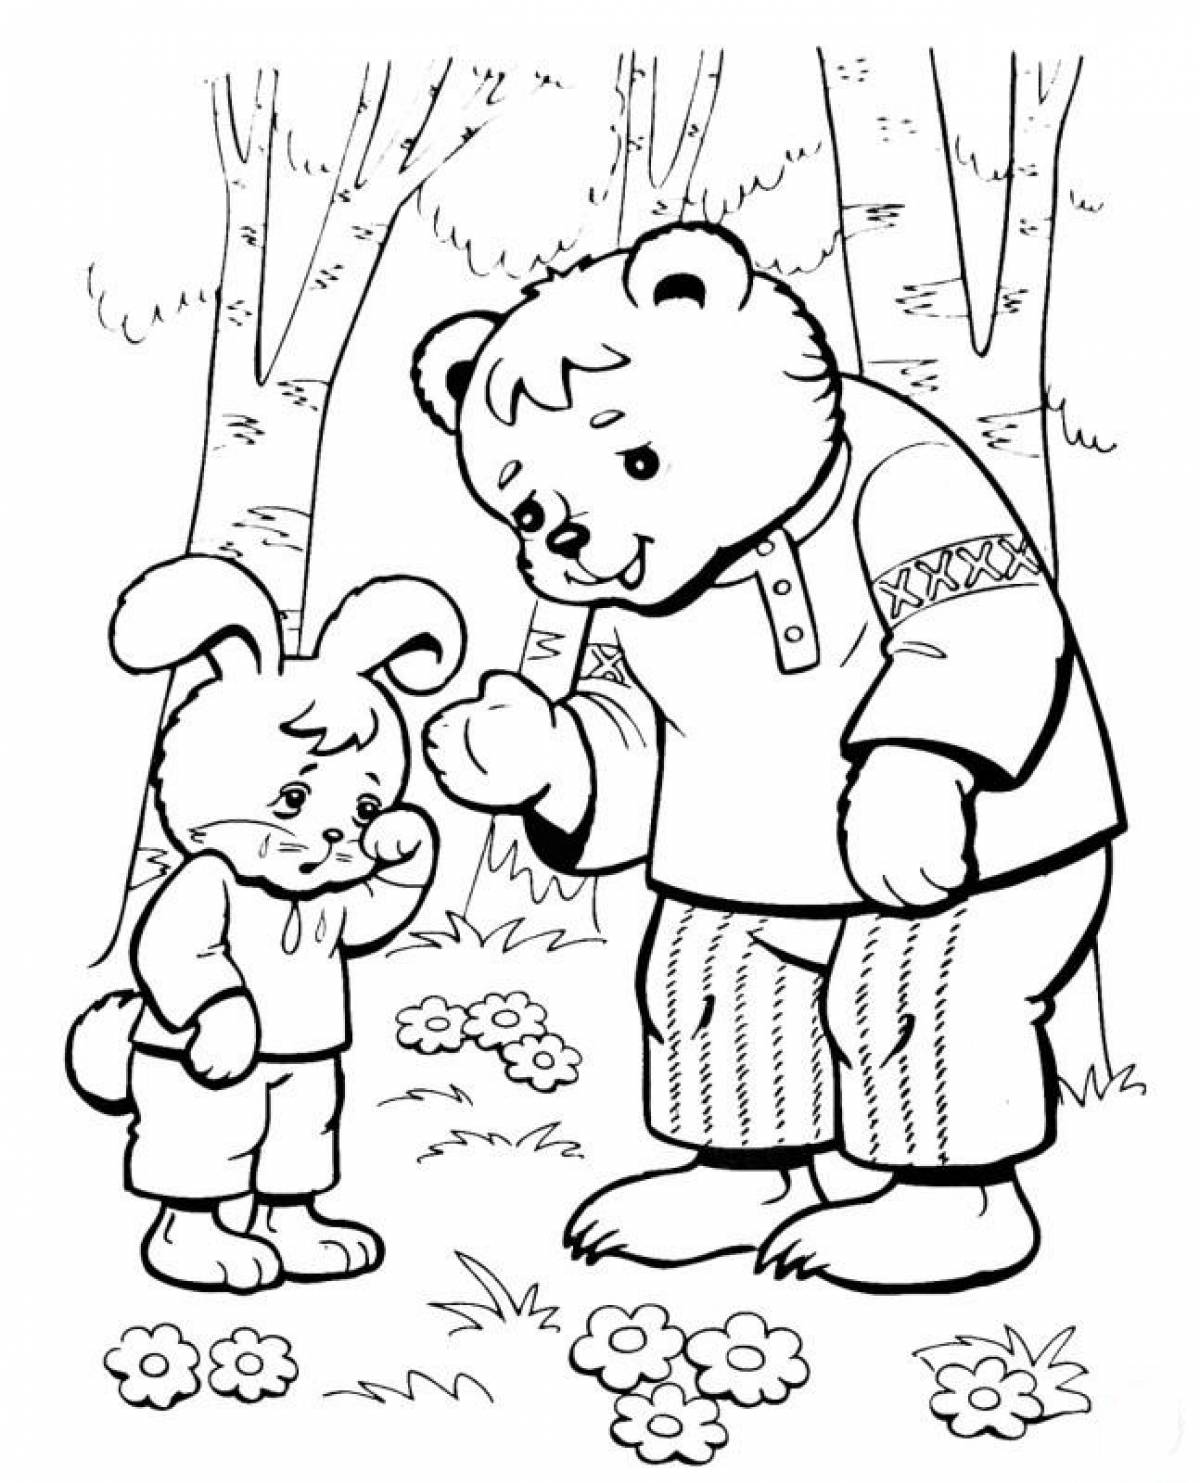 Bear and hare